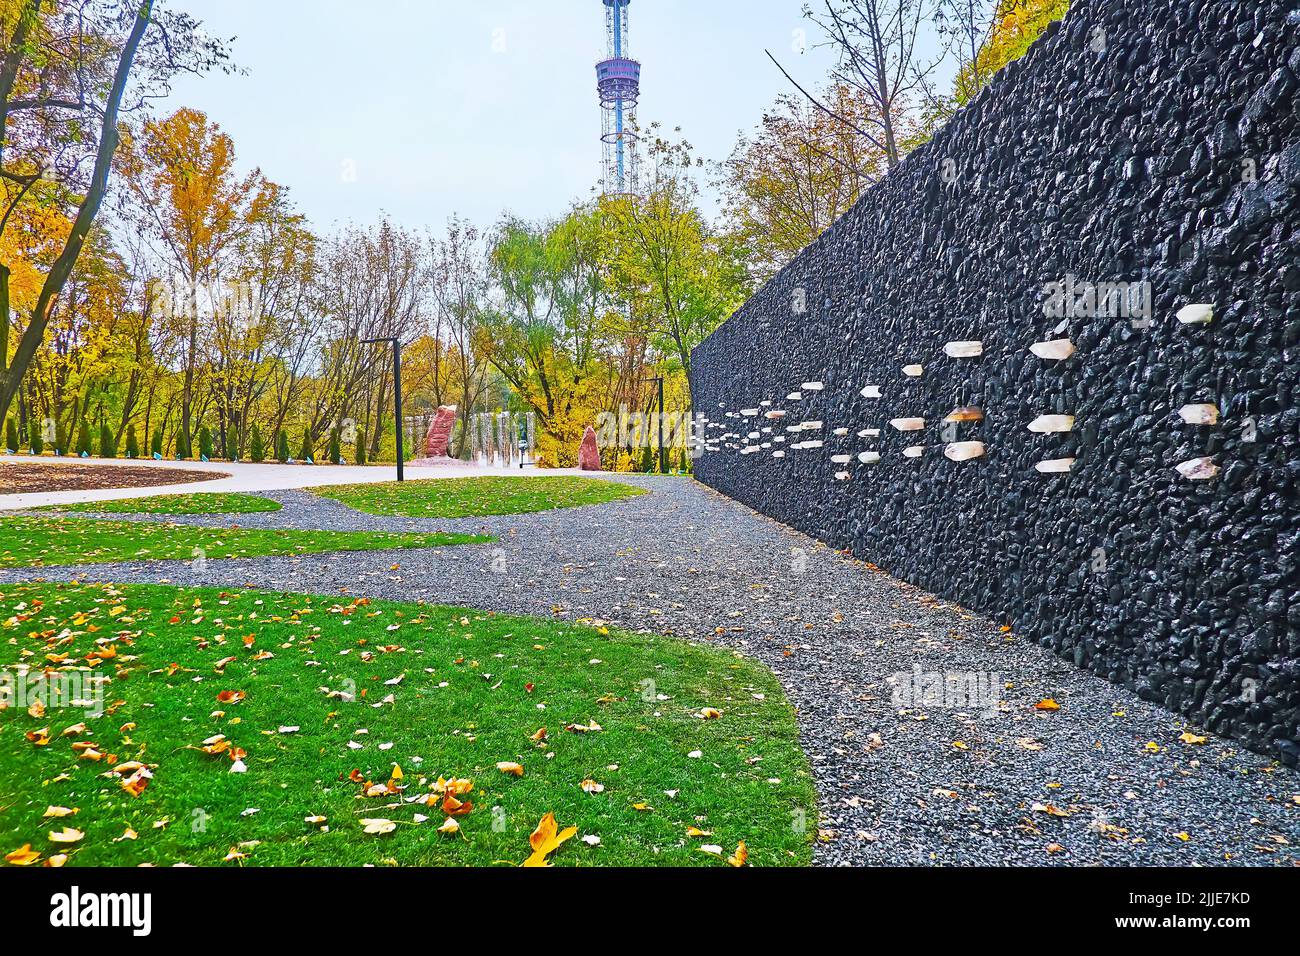 KYIV, UKRAINE - OCT 17, 2021:The Crystal Wailing Wall is one of the monuments, located in Babyn Yar Holocaust Memorial Park, on Oct 17 in Kyiv Stock Photo